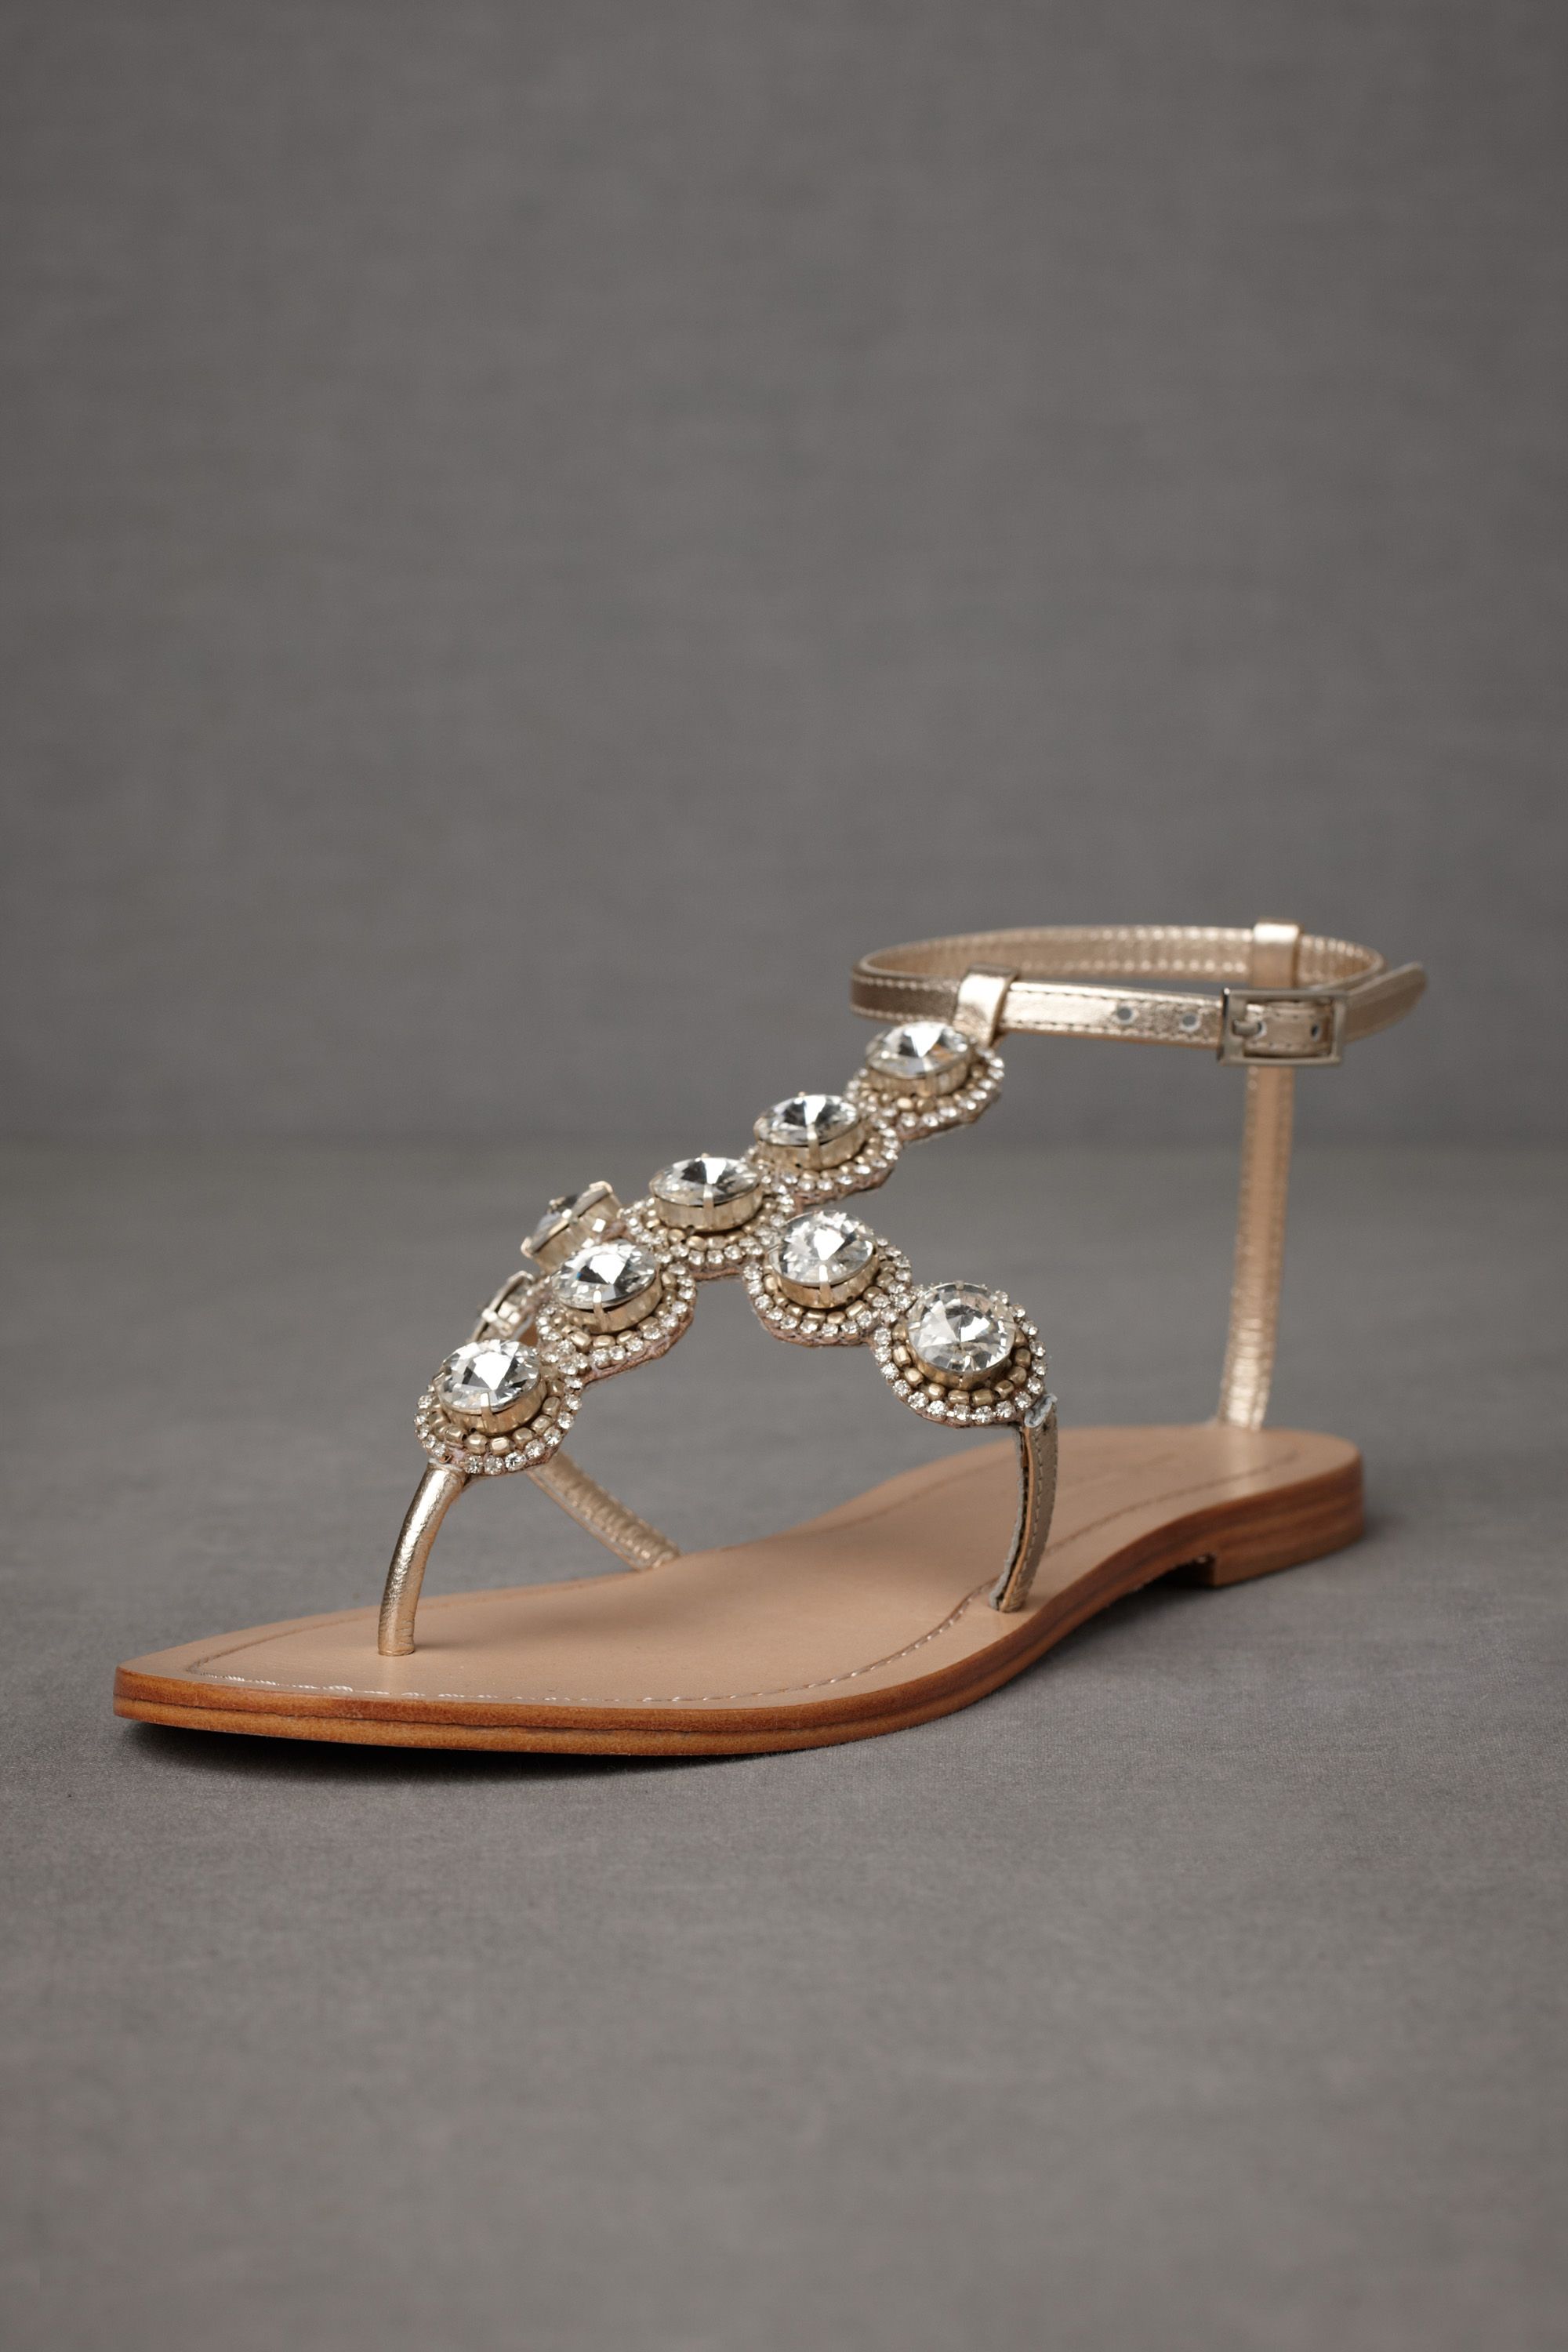 Brilliant Axis Sandals in Sale | BHLDN